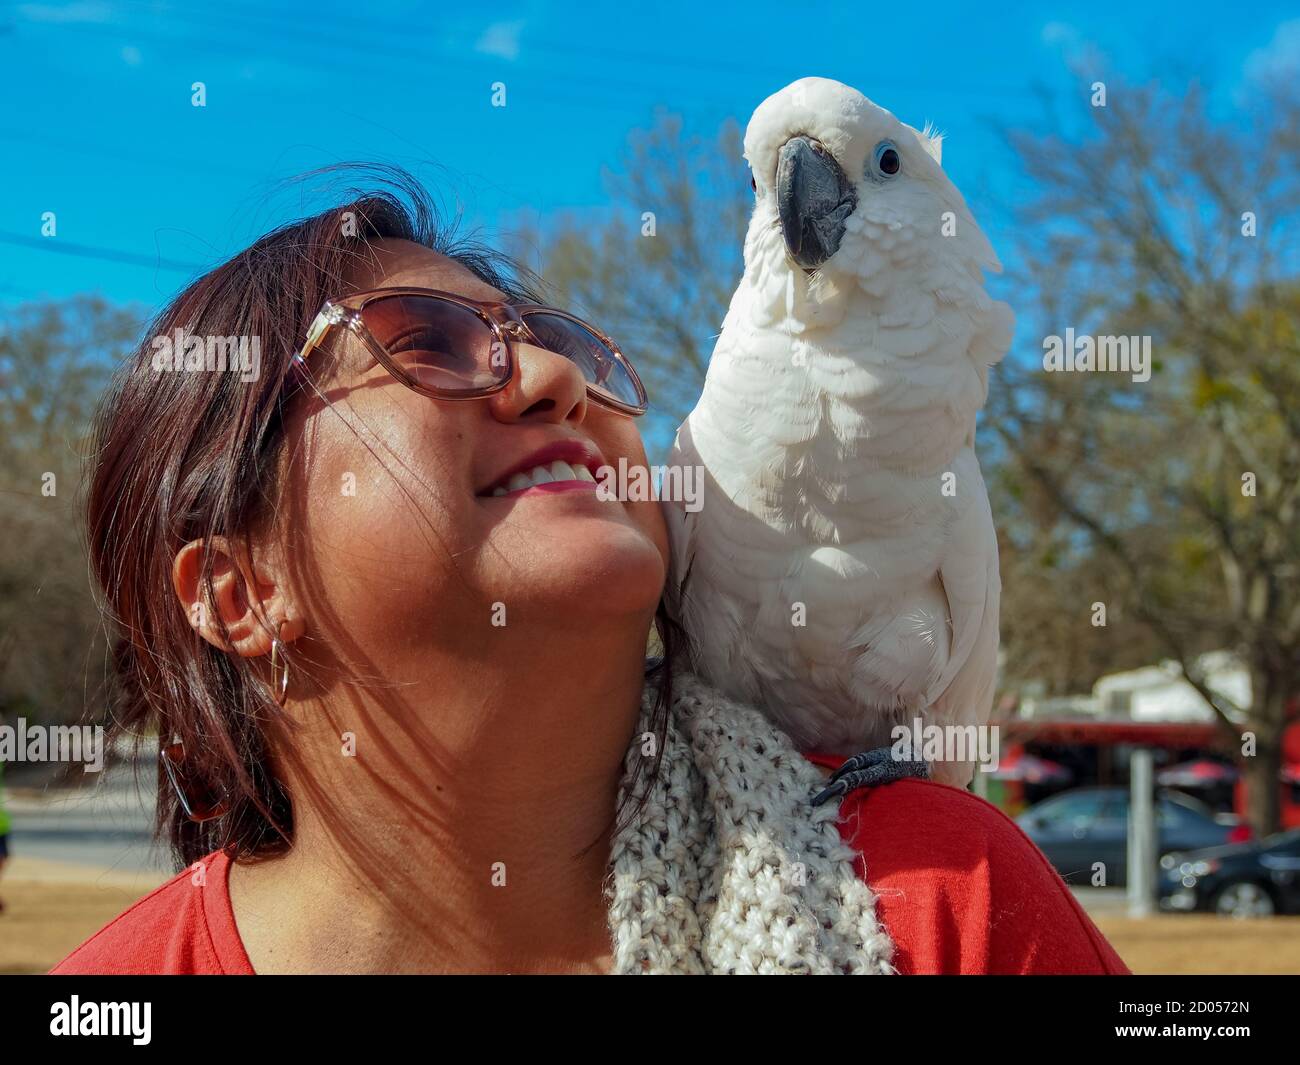 White cockatoo and southeast asian woman posing for a photo. Stock Photo